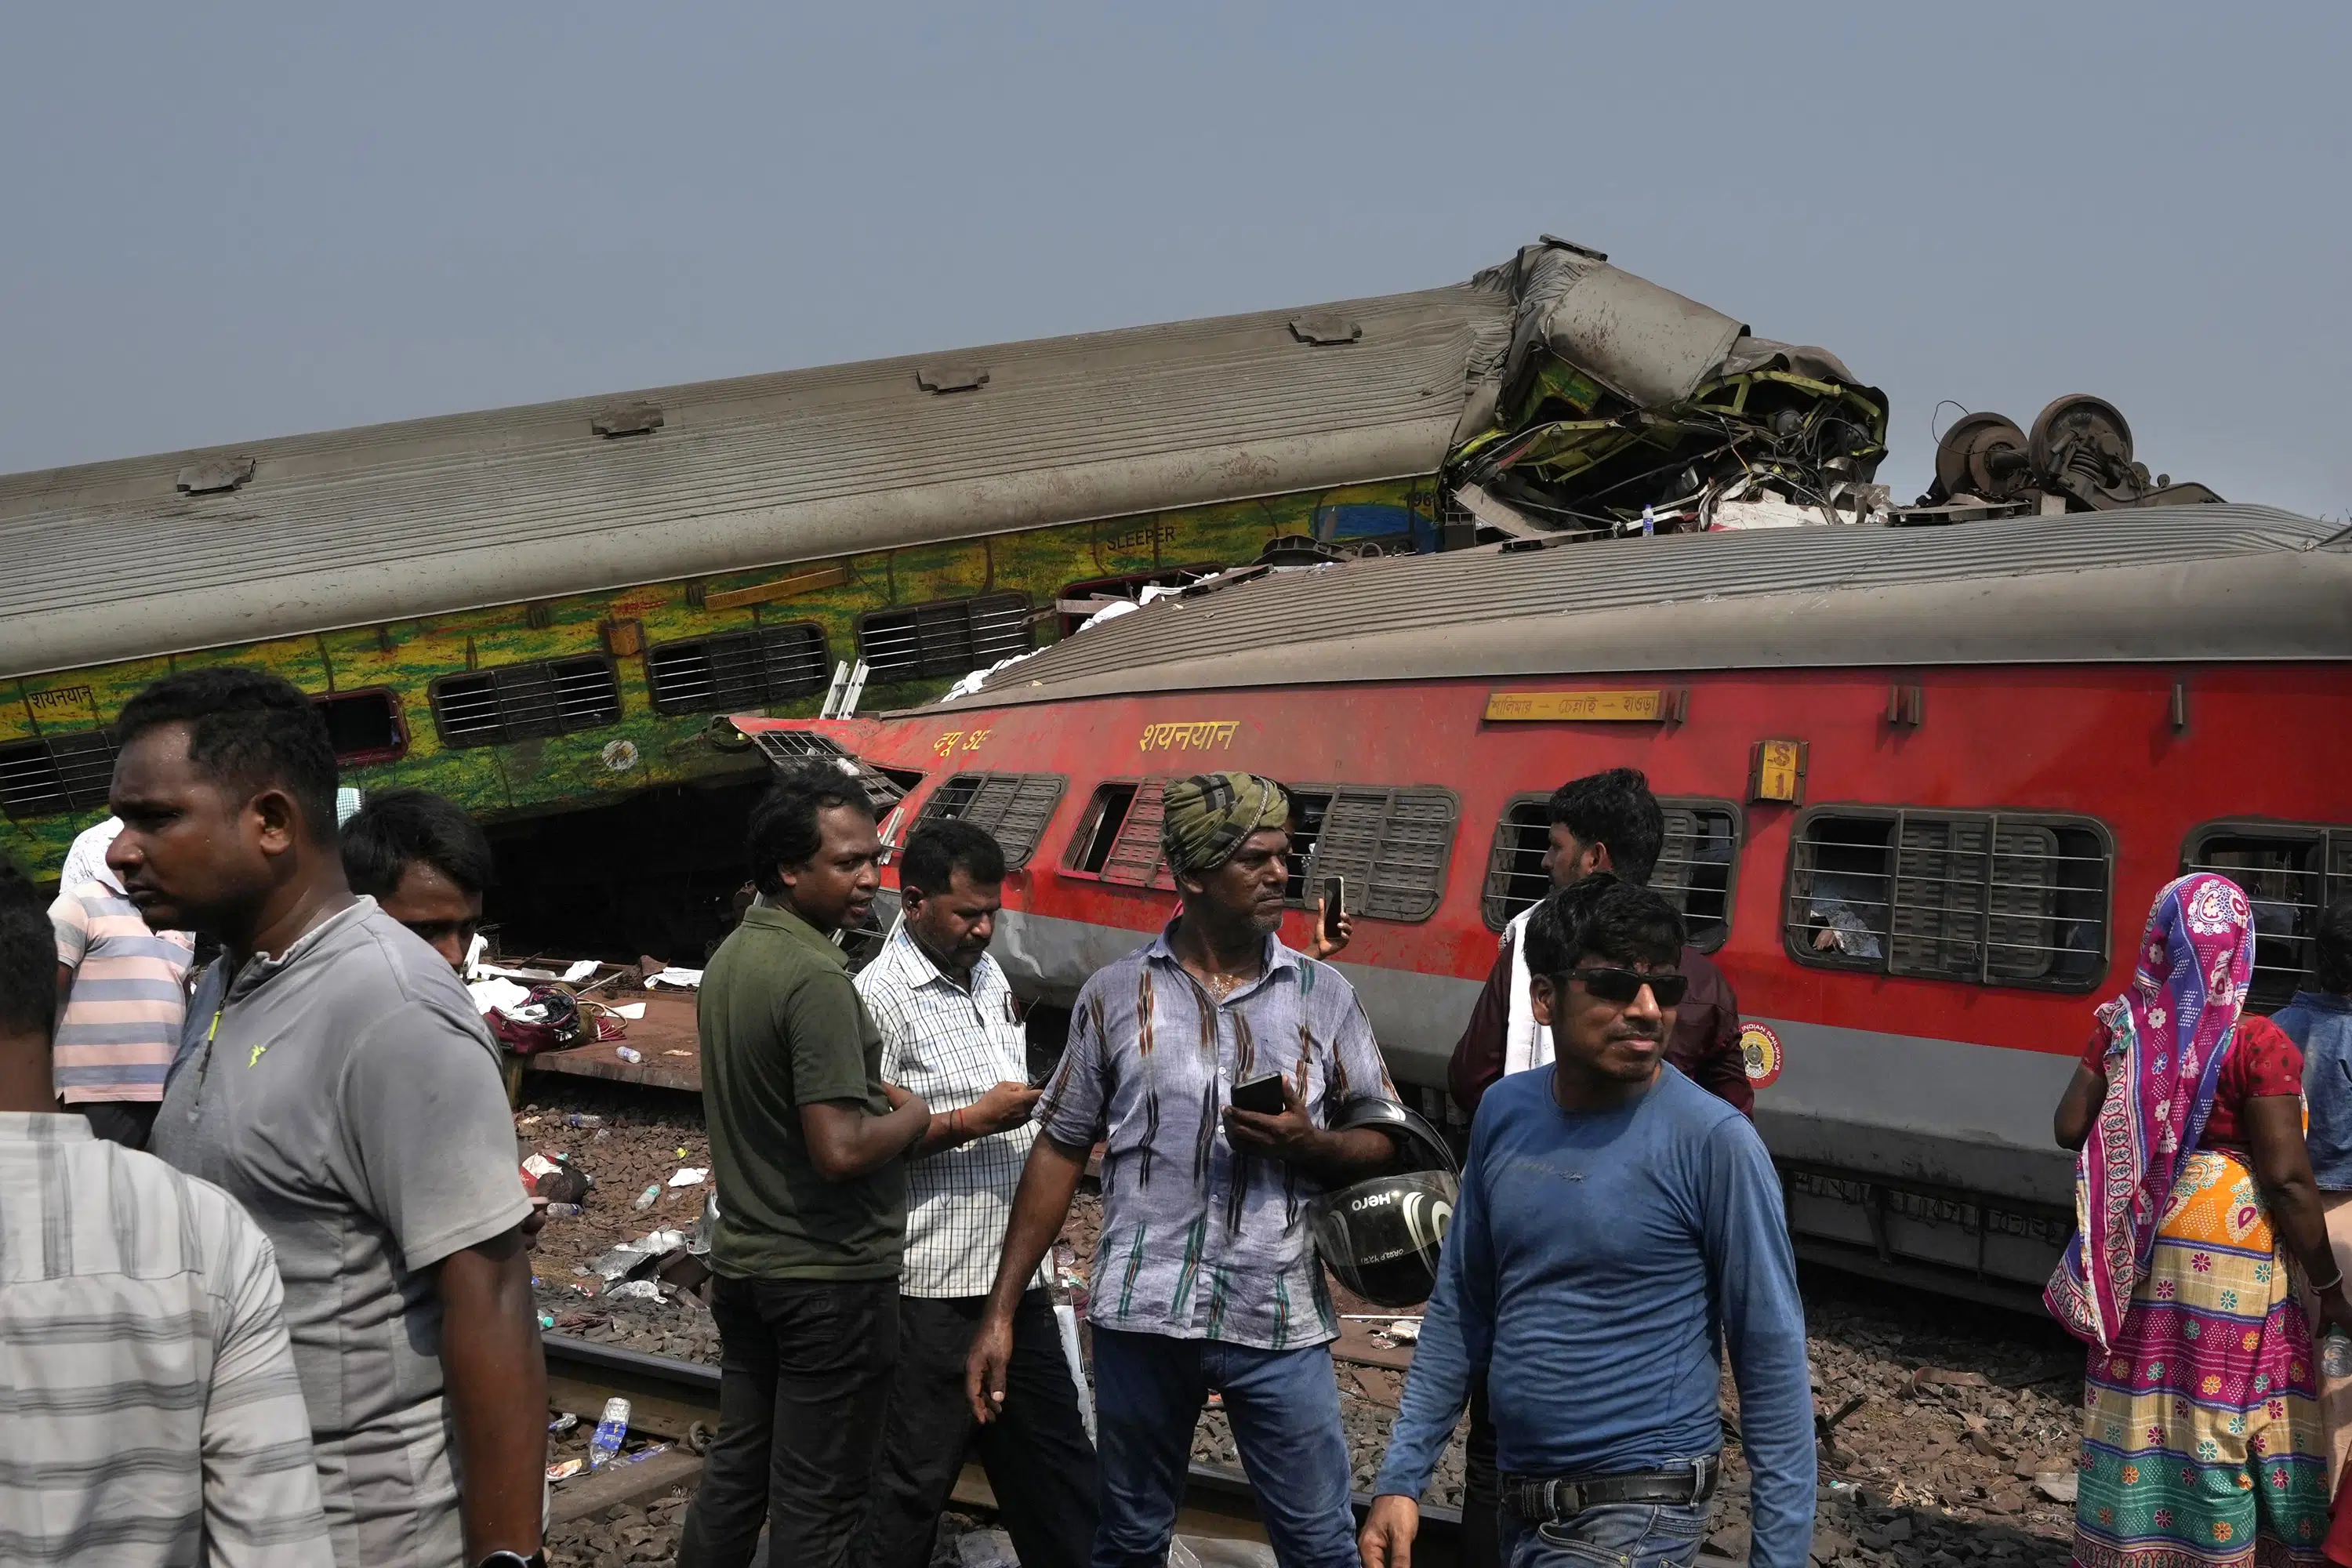 India’s fatal train crash renews safety concerns as government pushes for railway modernization